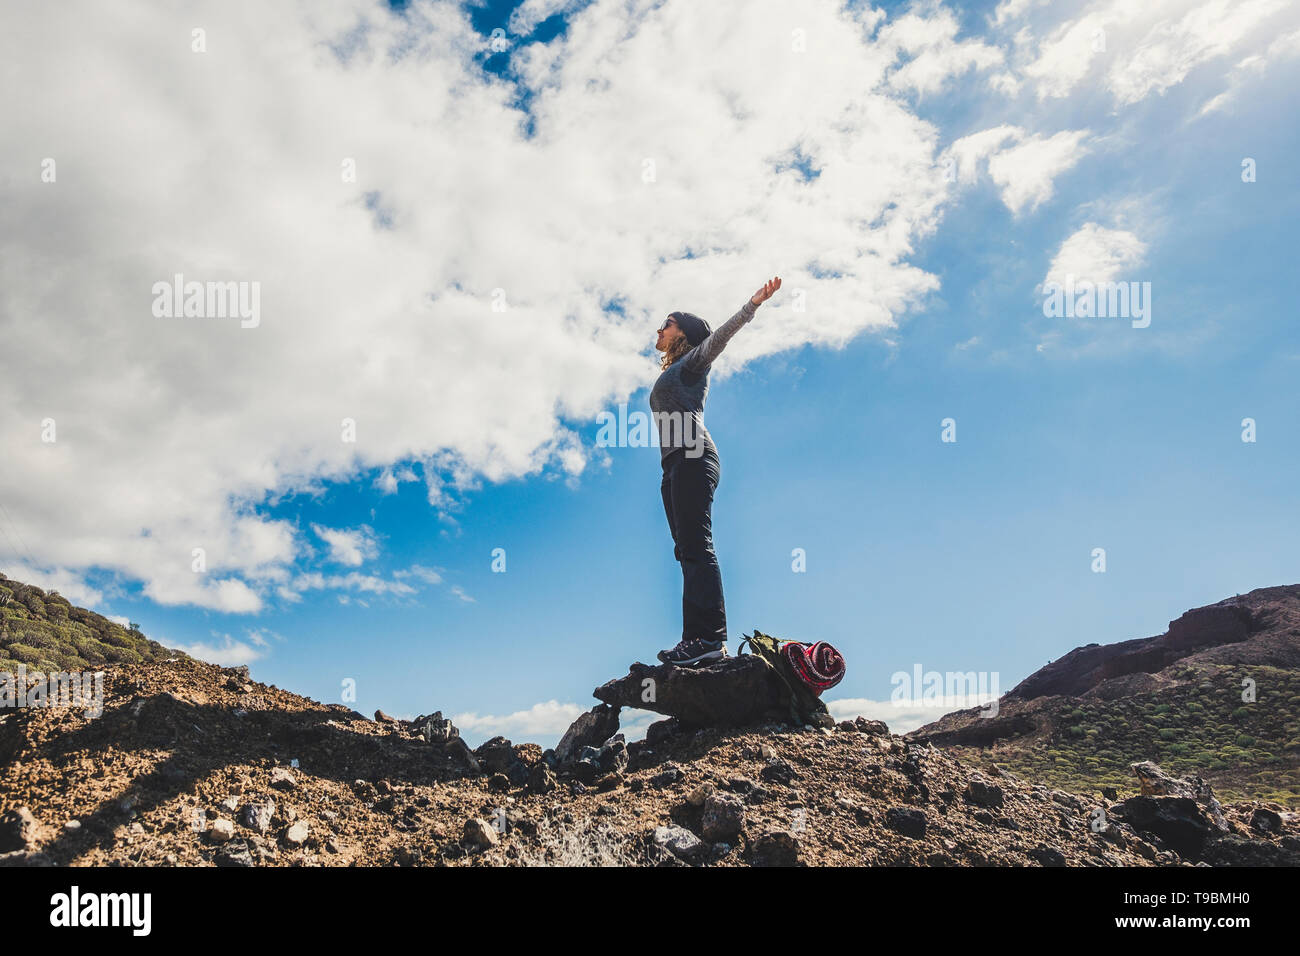 Happiness and freedom people concept - standing woman with backpack and adventure equipment opeing arms enjoying the outdoor nature around - success h Stock Photo